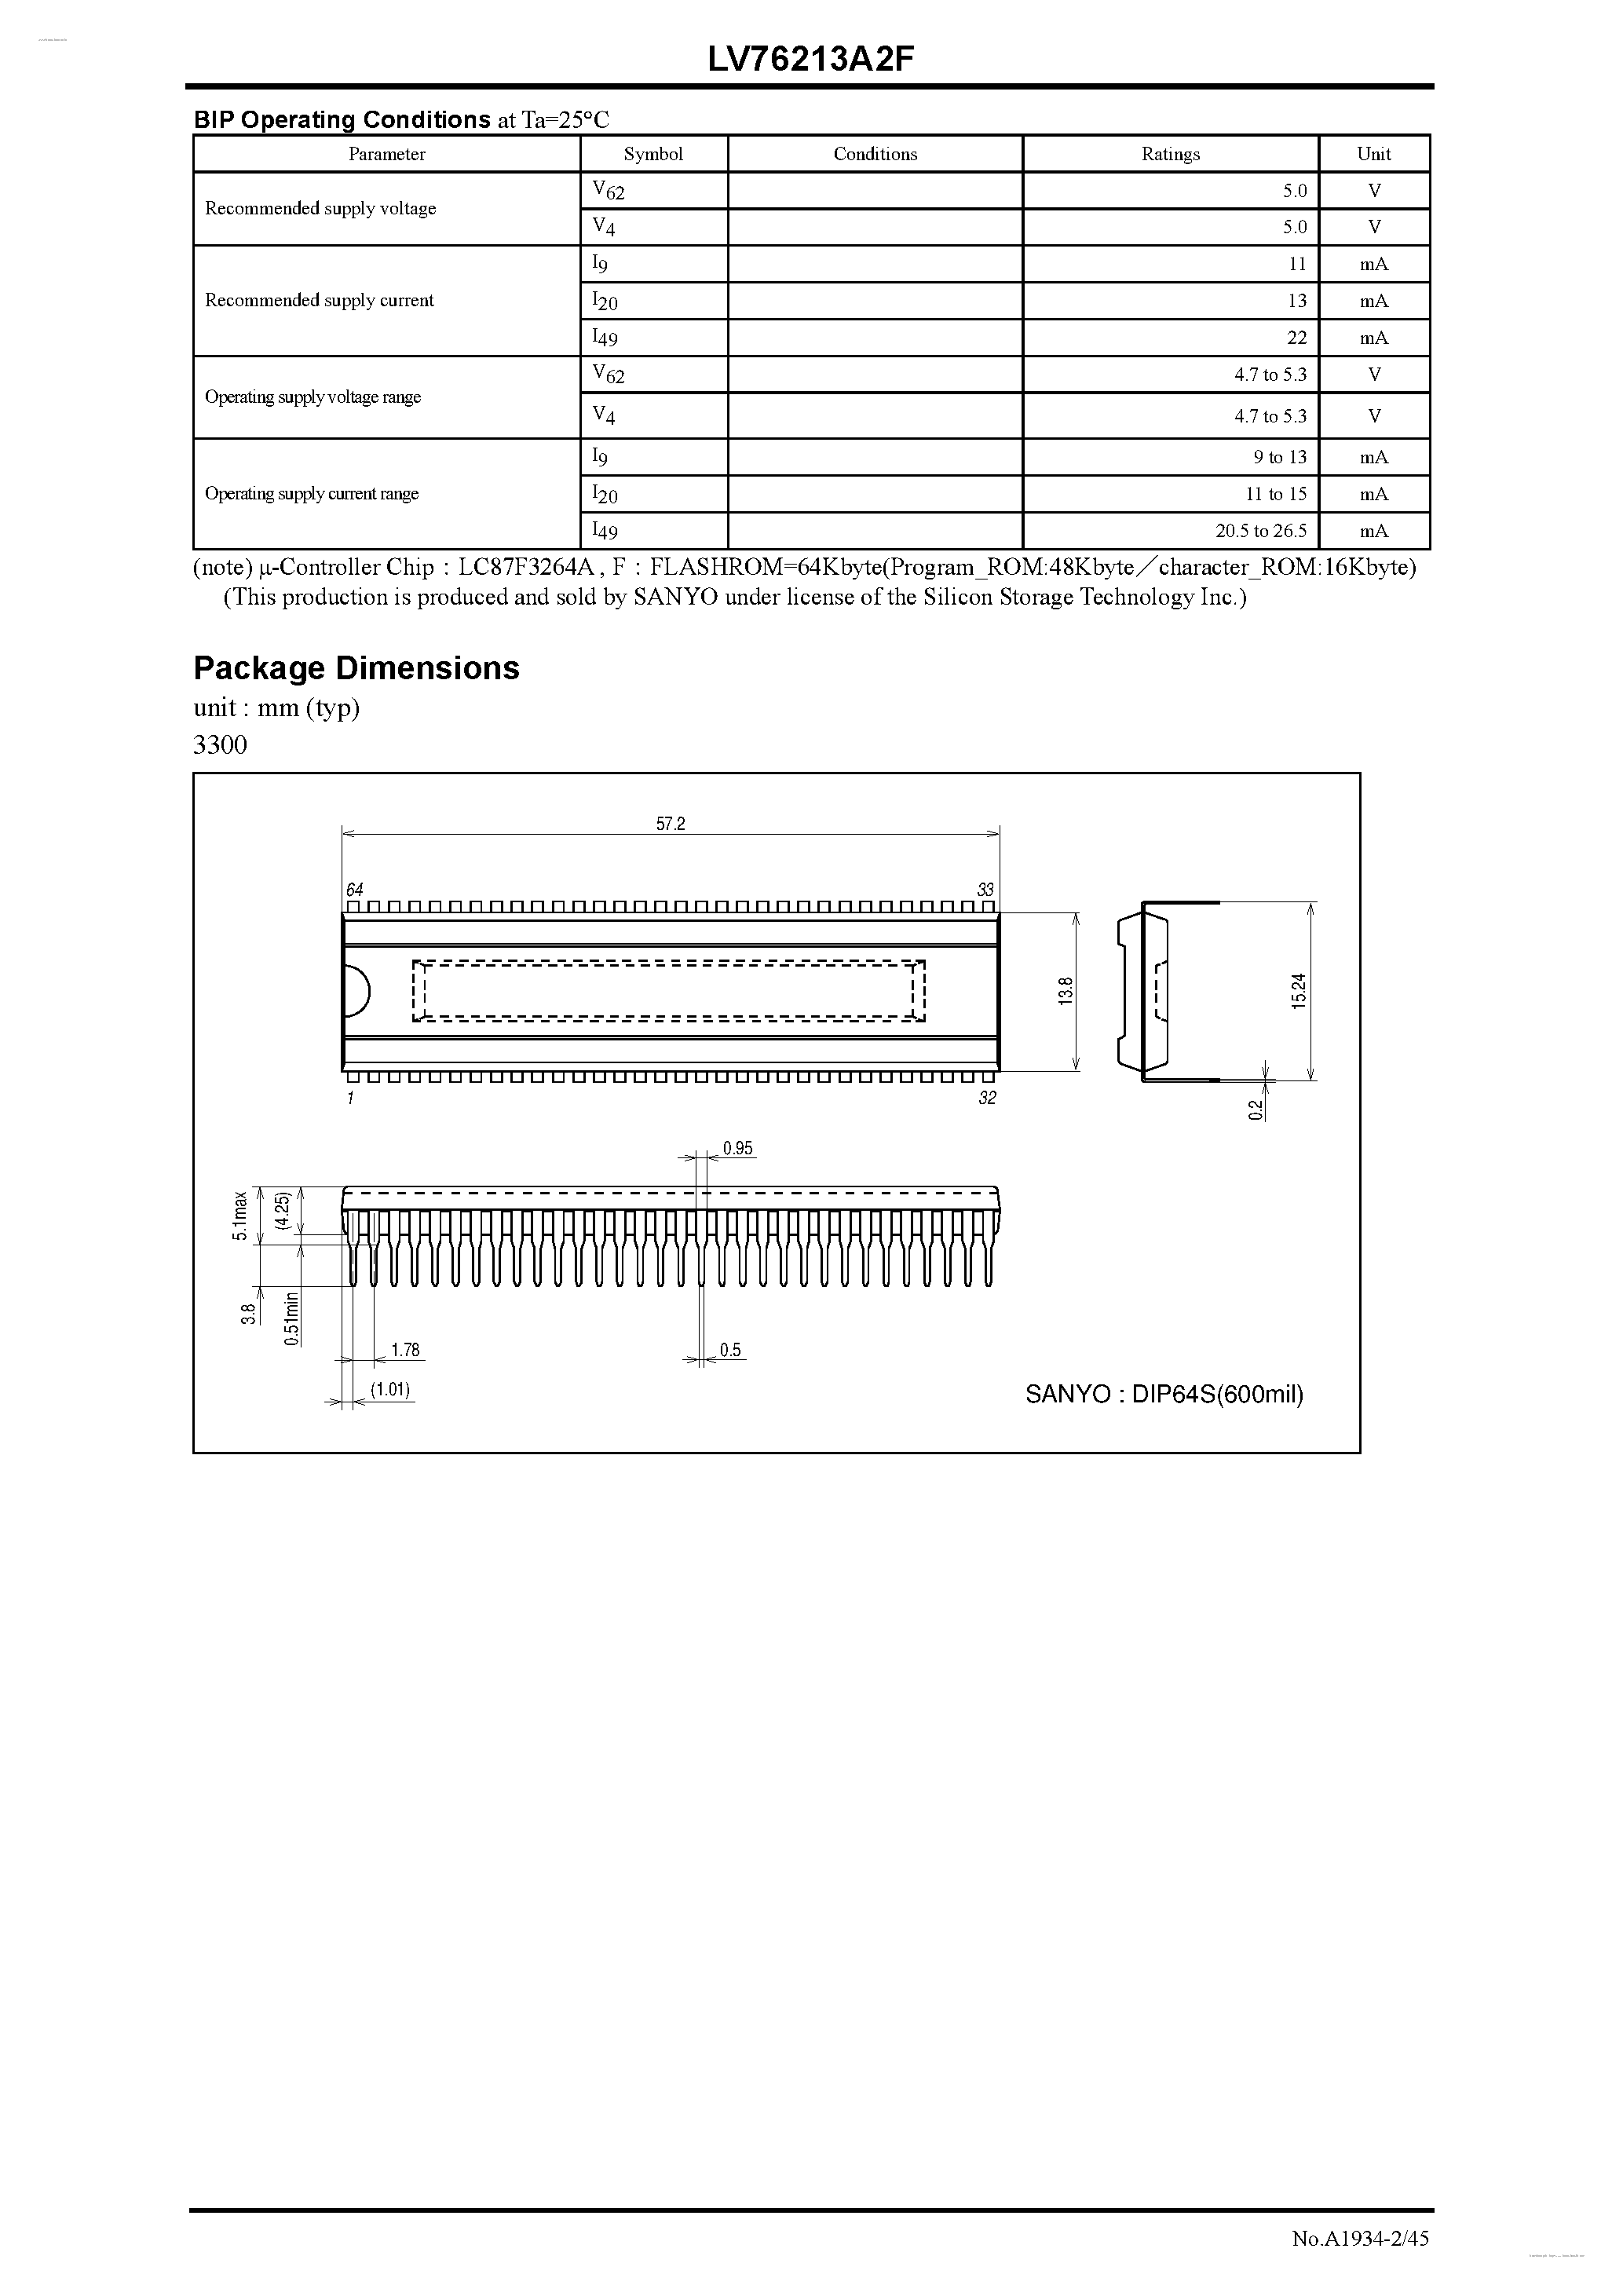 Datasheet LV76213A2F - VIF/SIF/Y/C/Deflection /CbCr IN Implemented in a Single Chip page 2